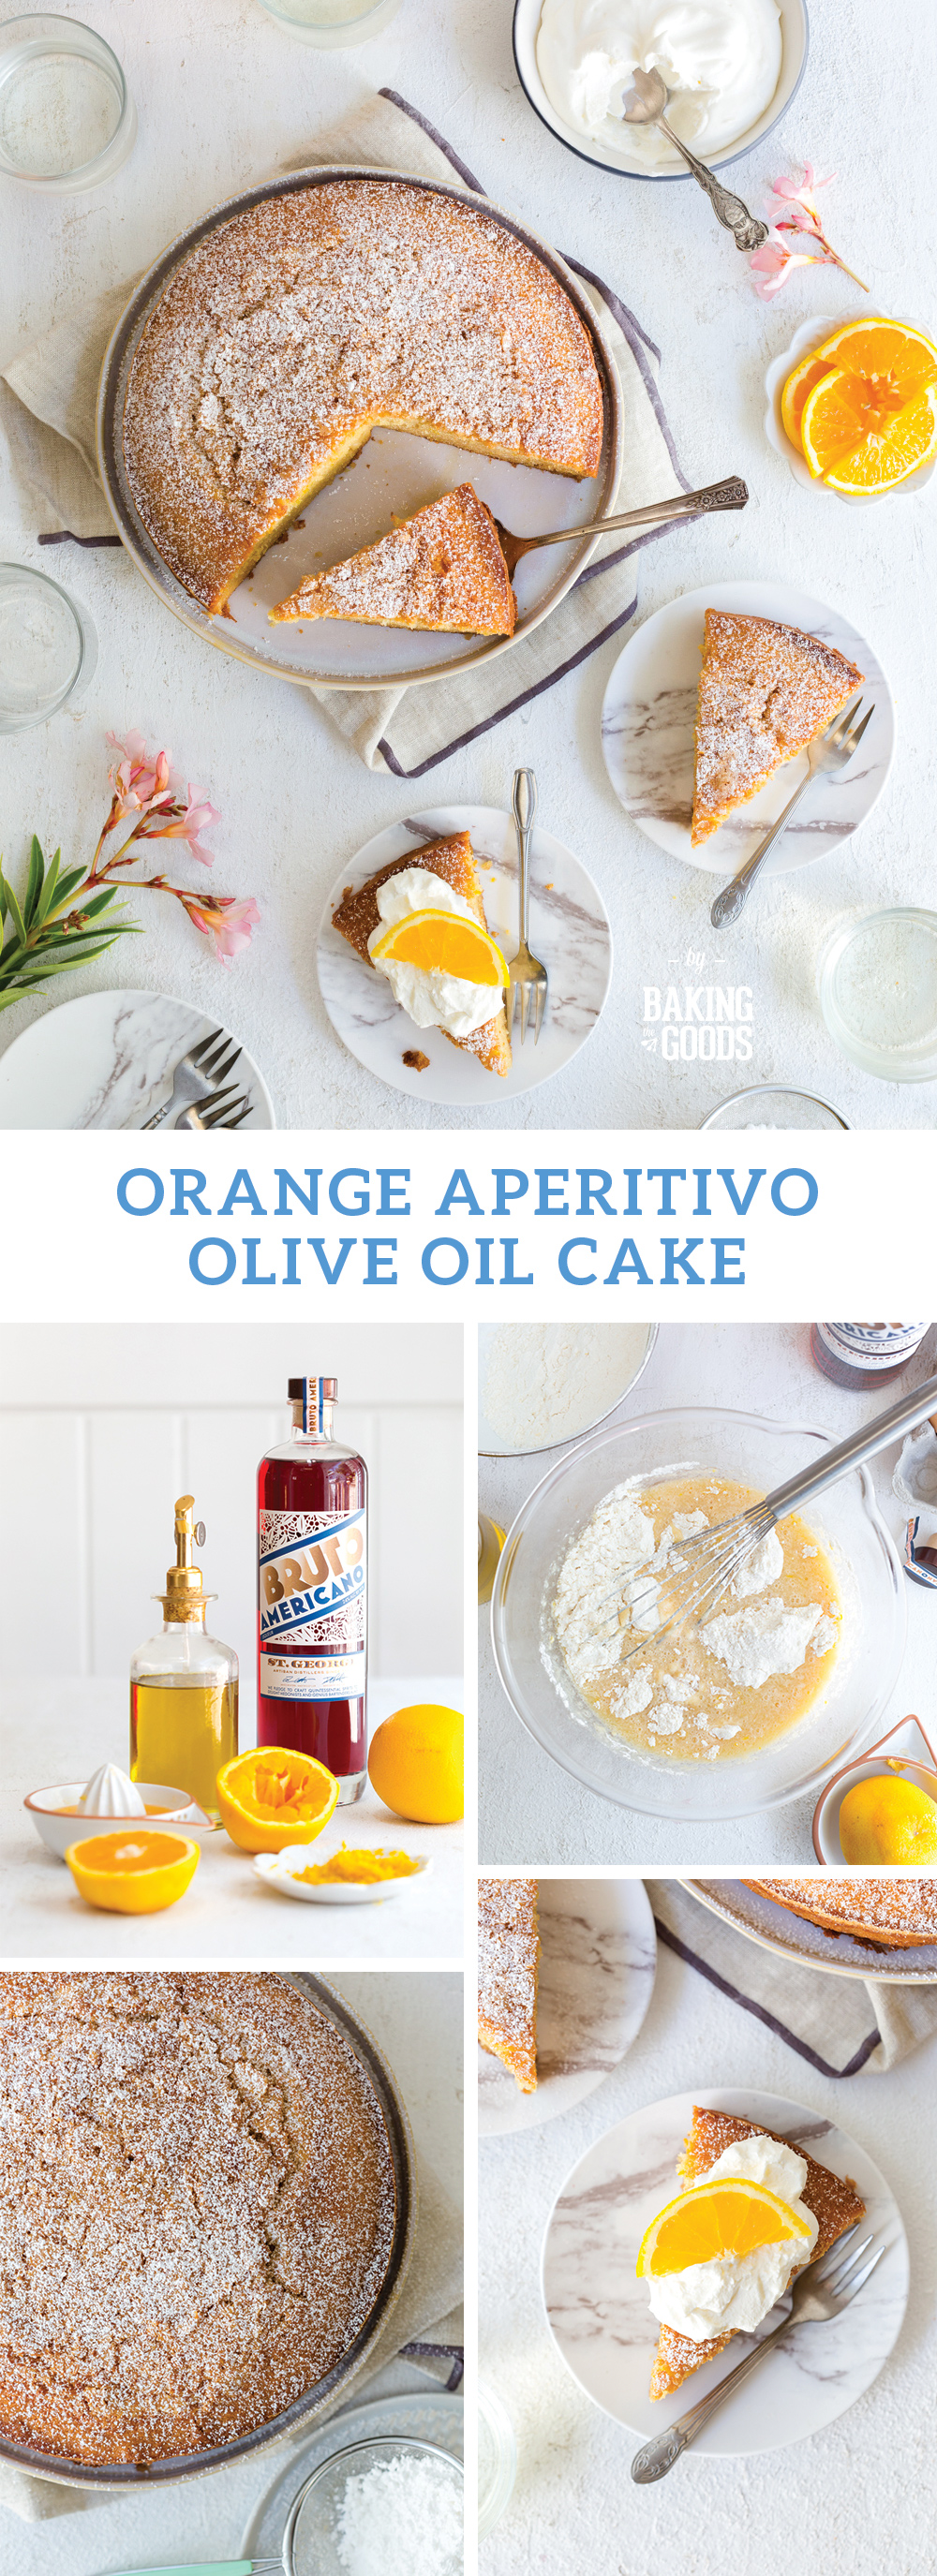 Orange Aperitivo Olive Oil Cake by Baking The Goods